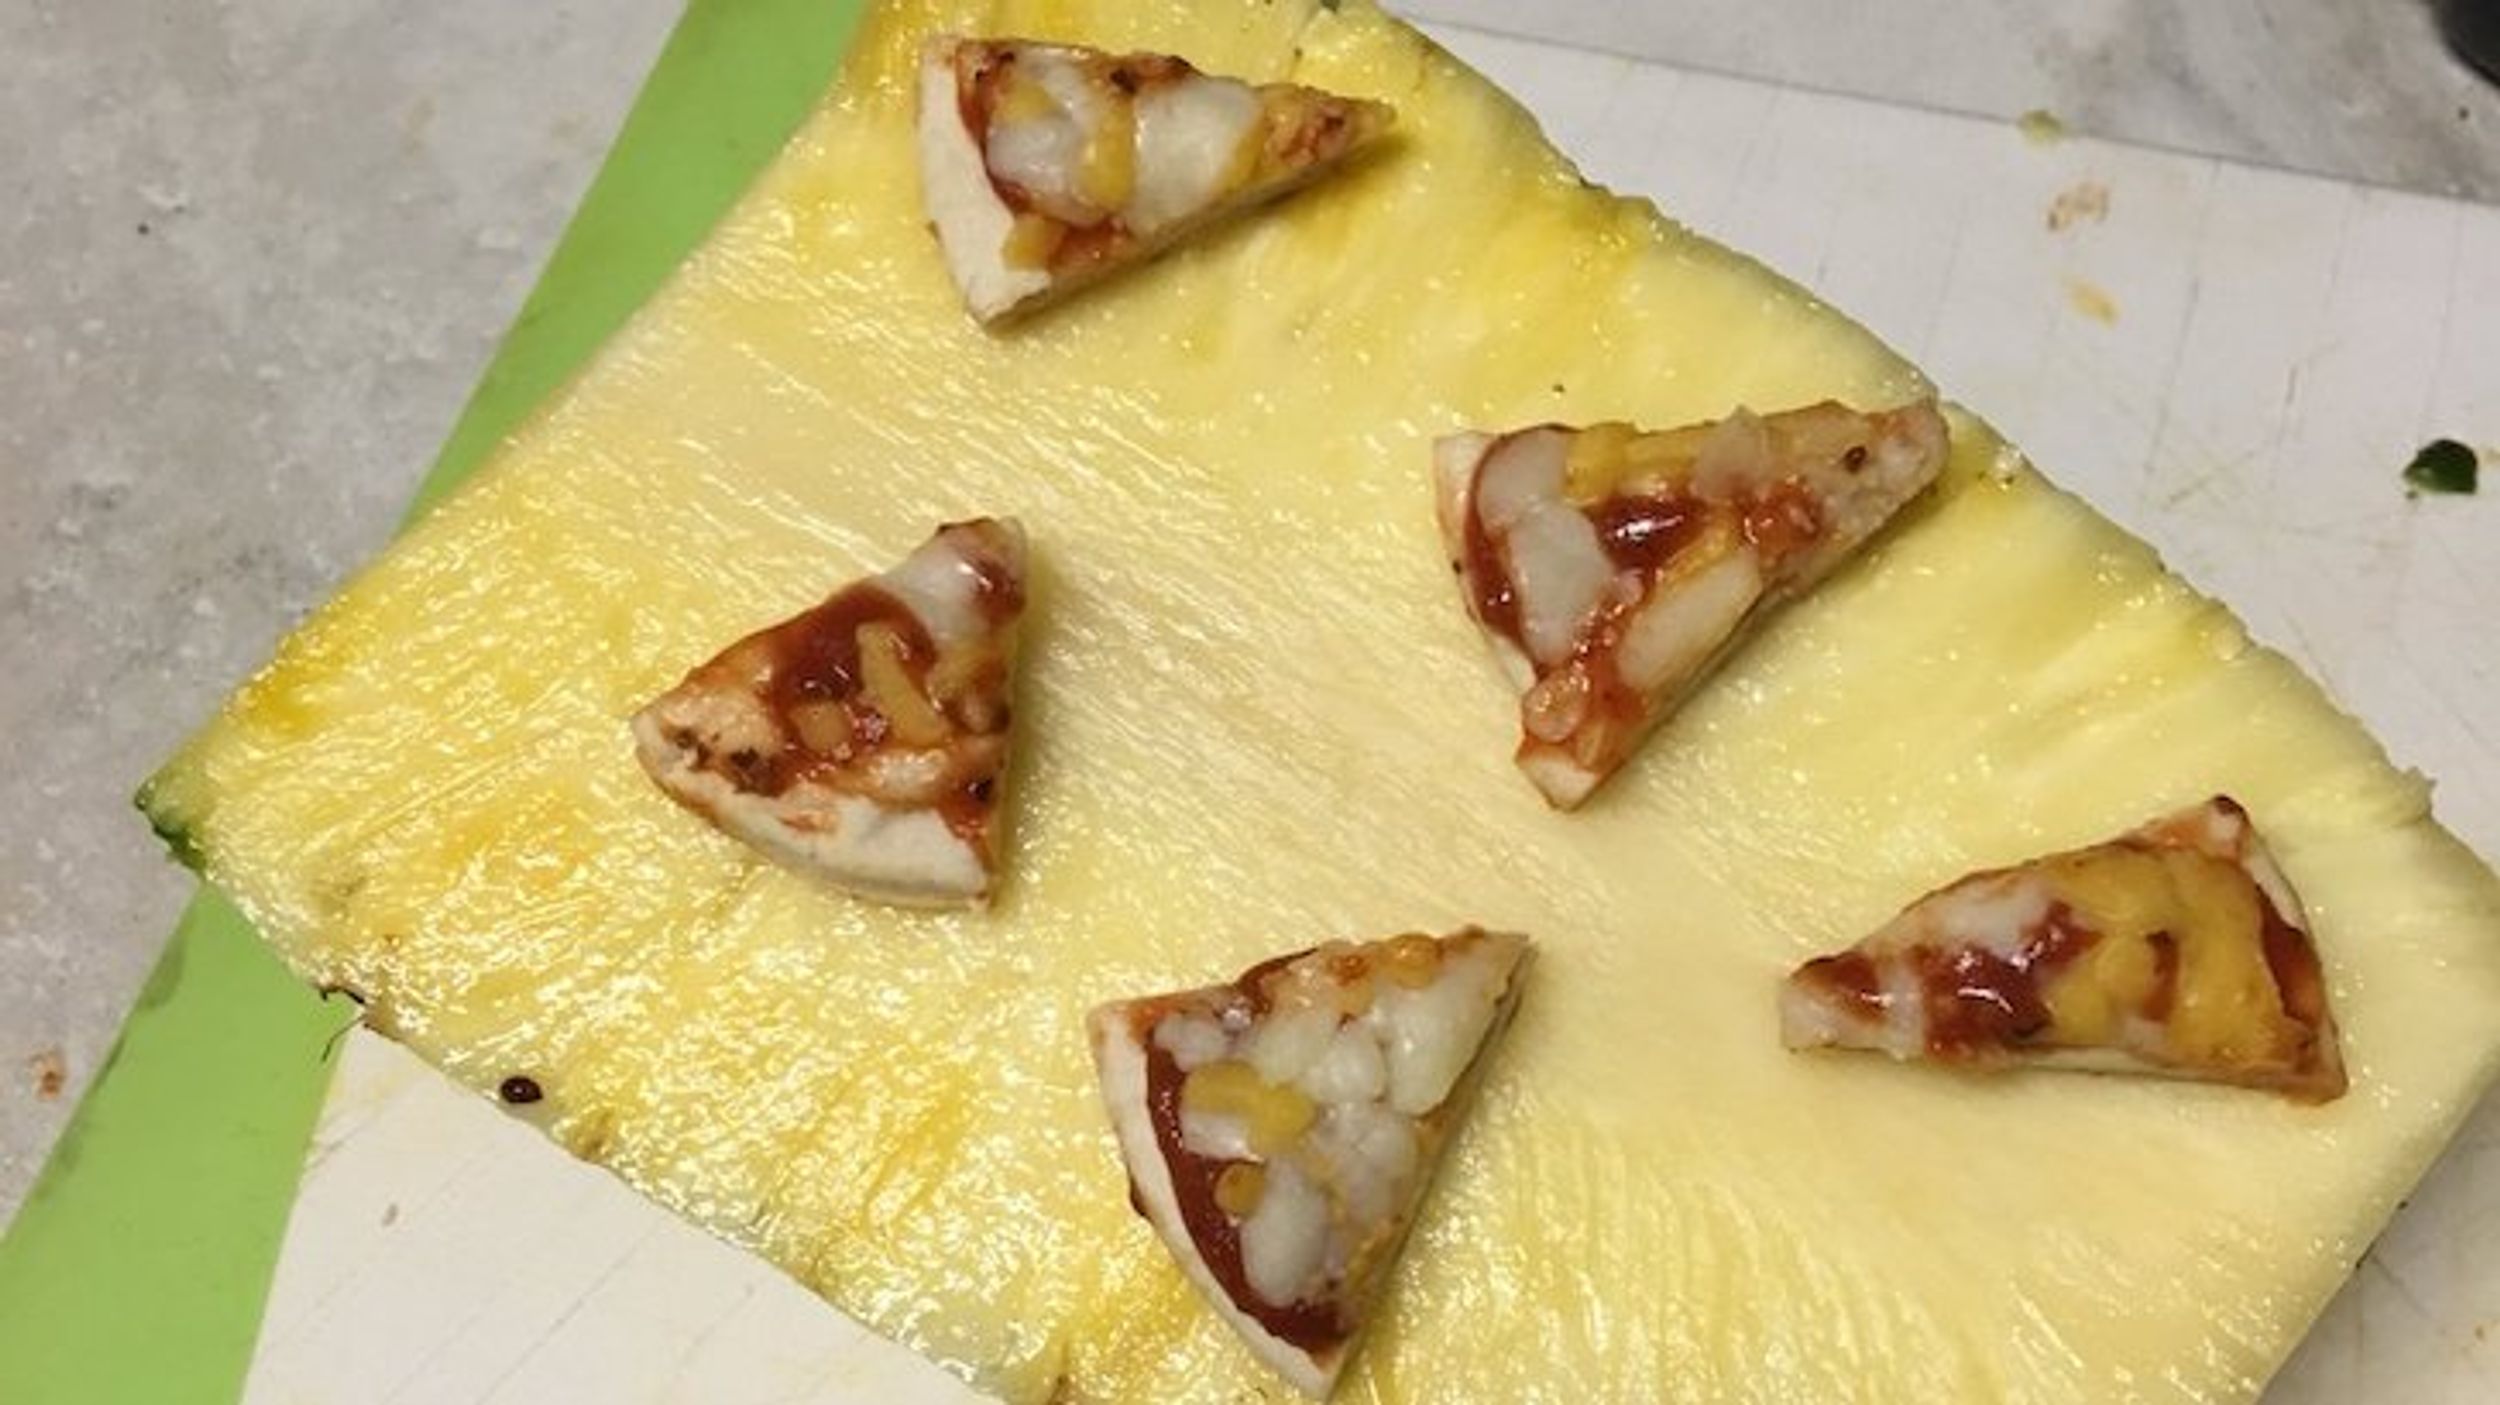 PHOTO: Pizza on Pineapple Pictures Twist Causes Twitter Explosion